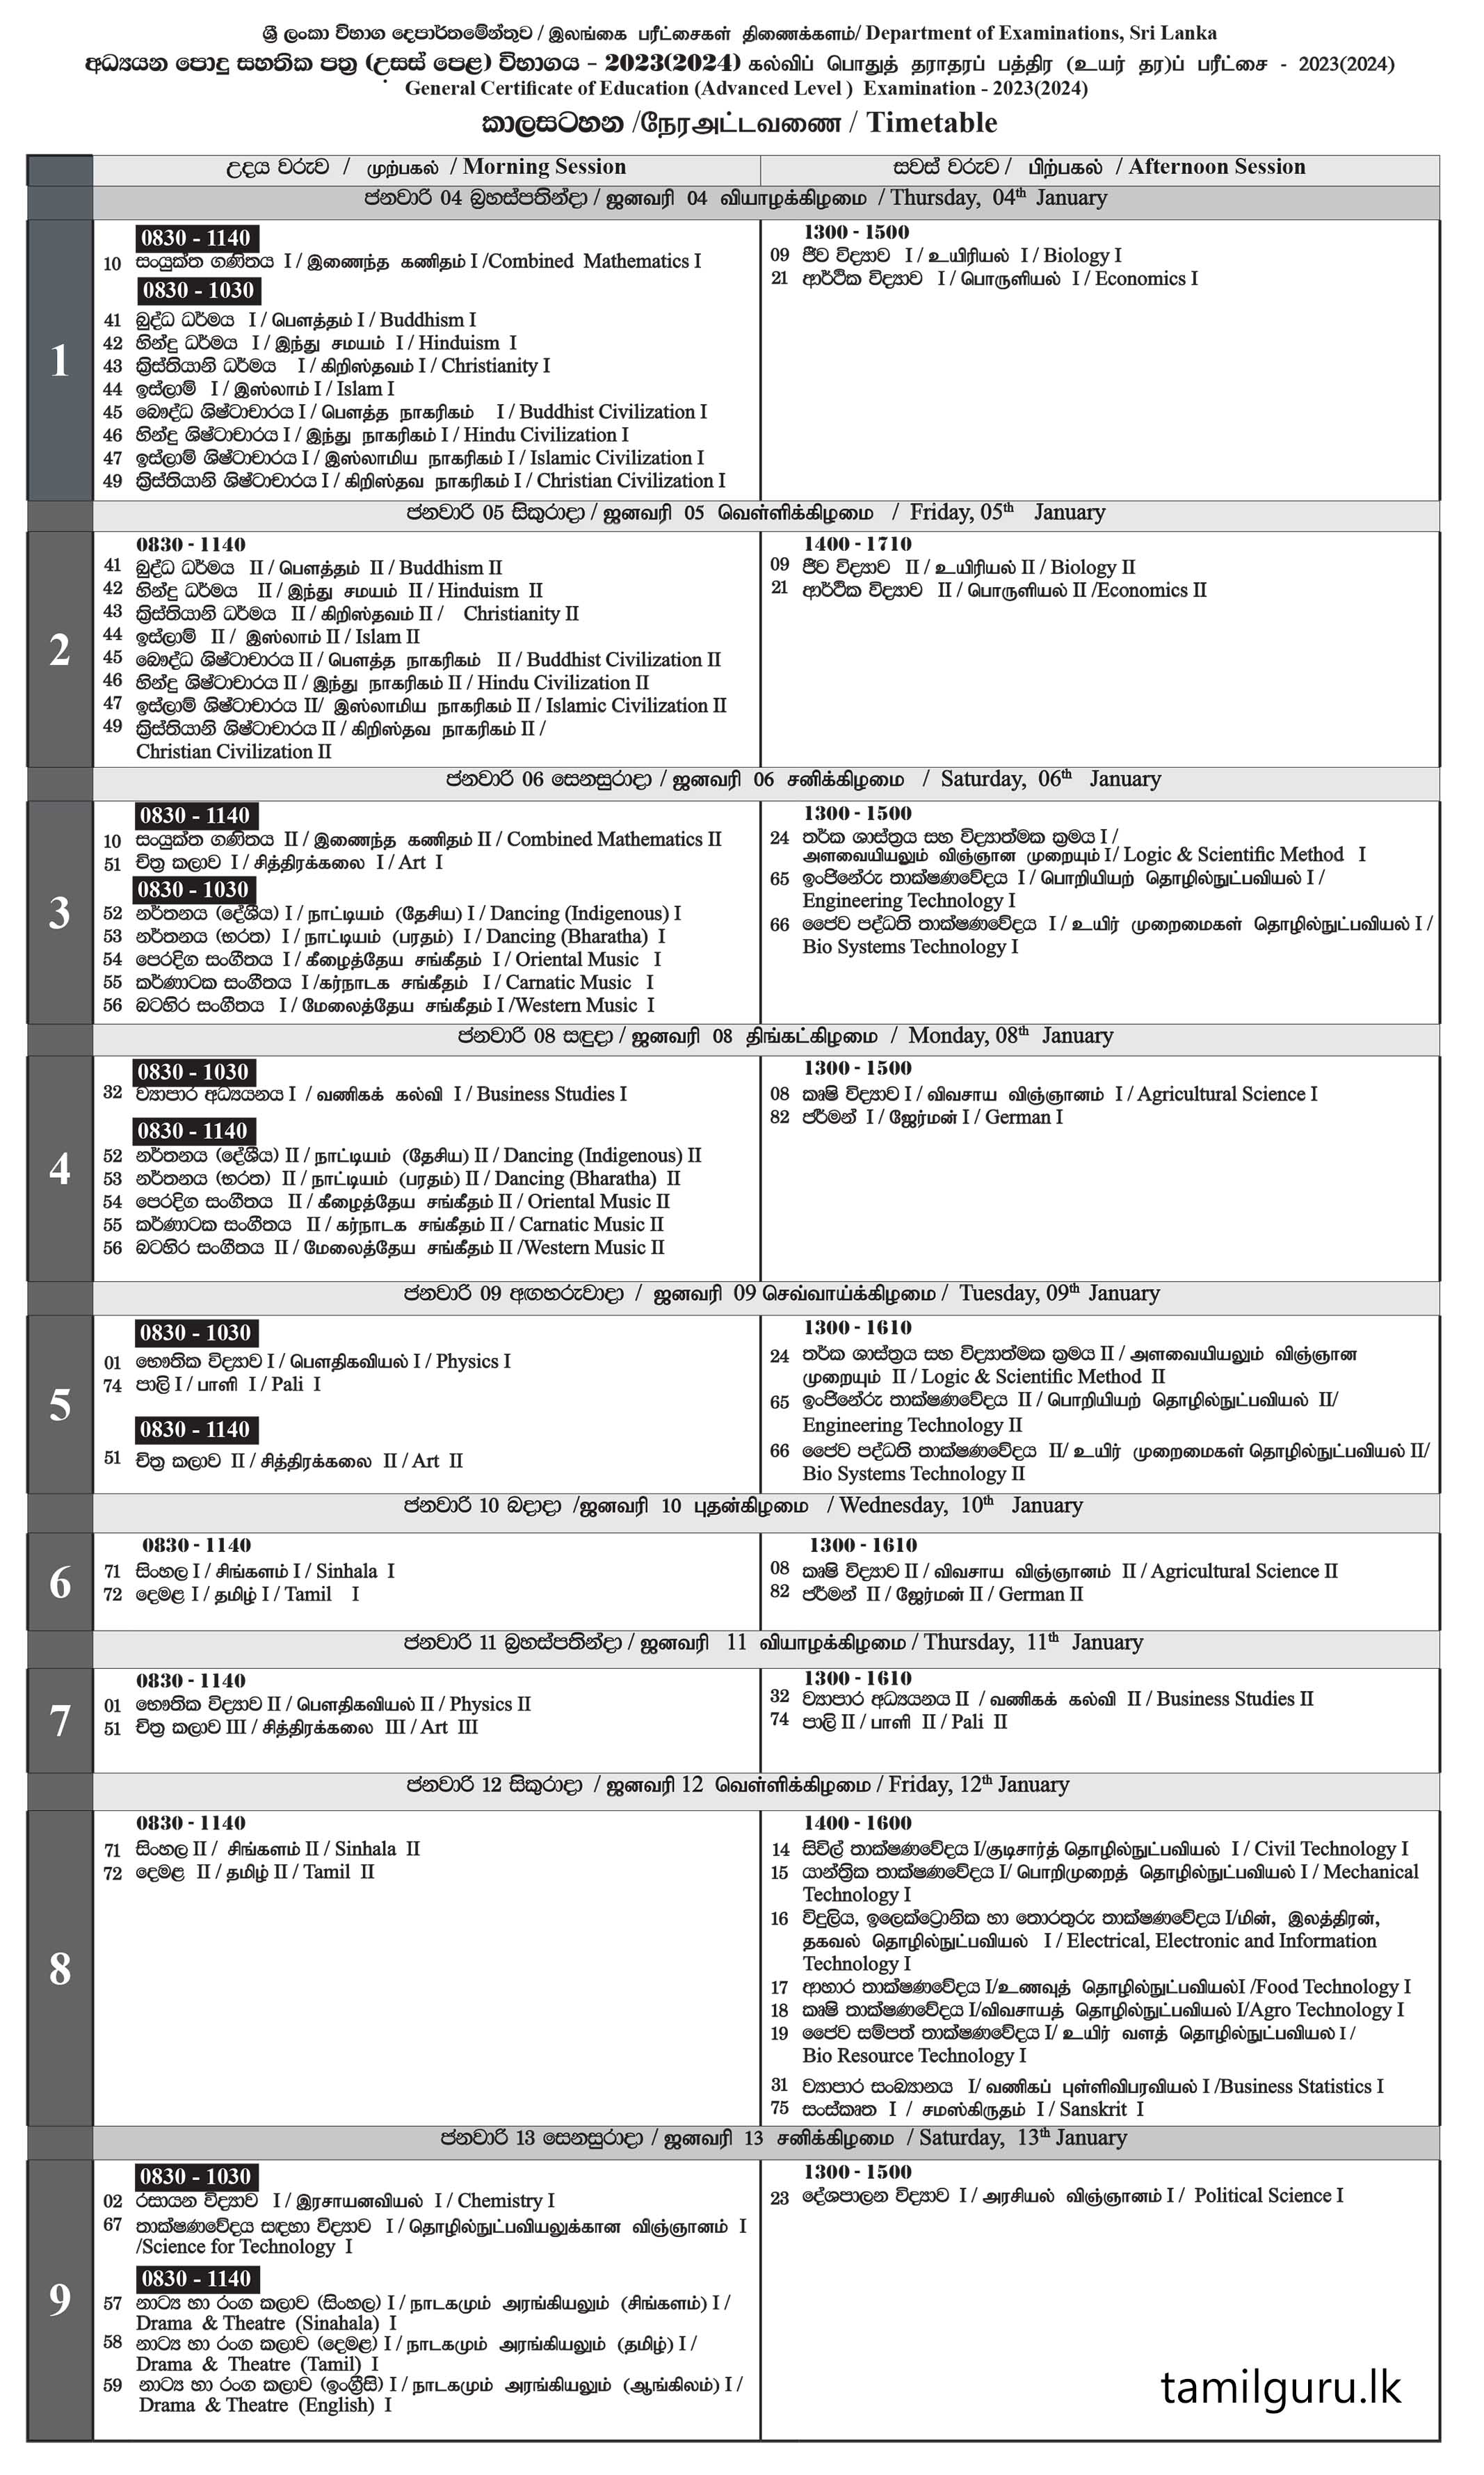 G.C.E. A/L Examination Time Table 2023 (2024) - Department of Examinations